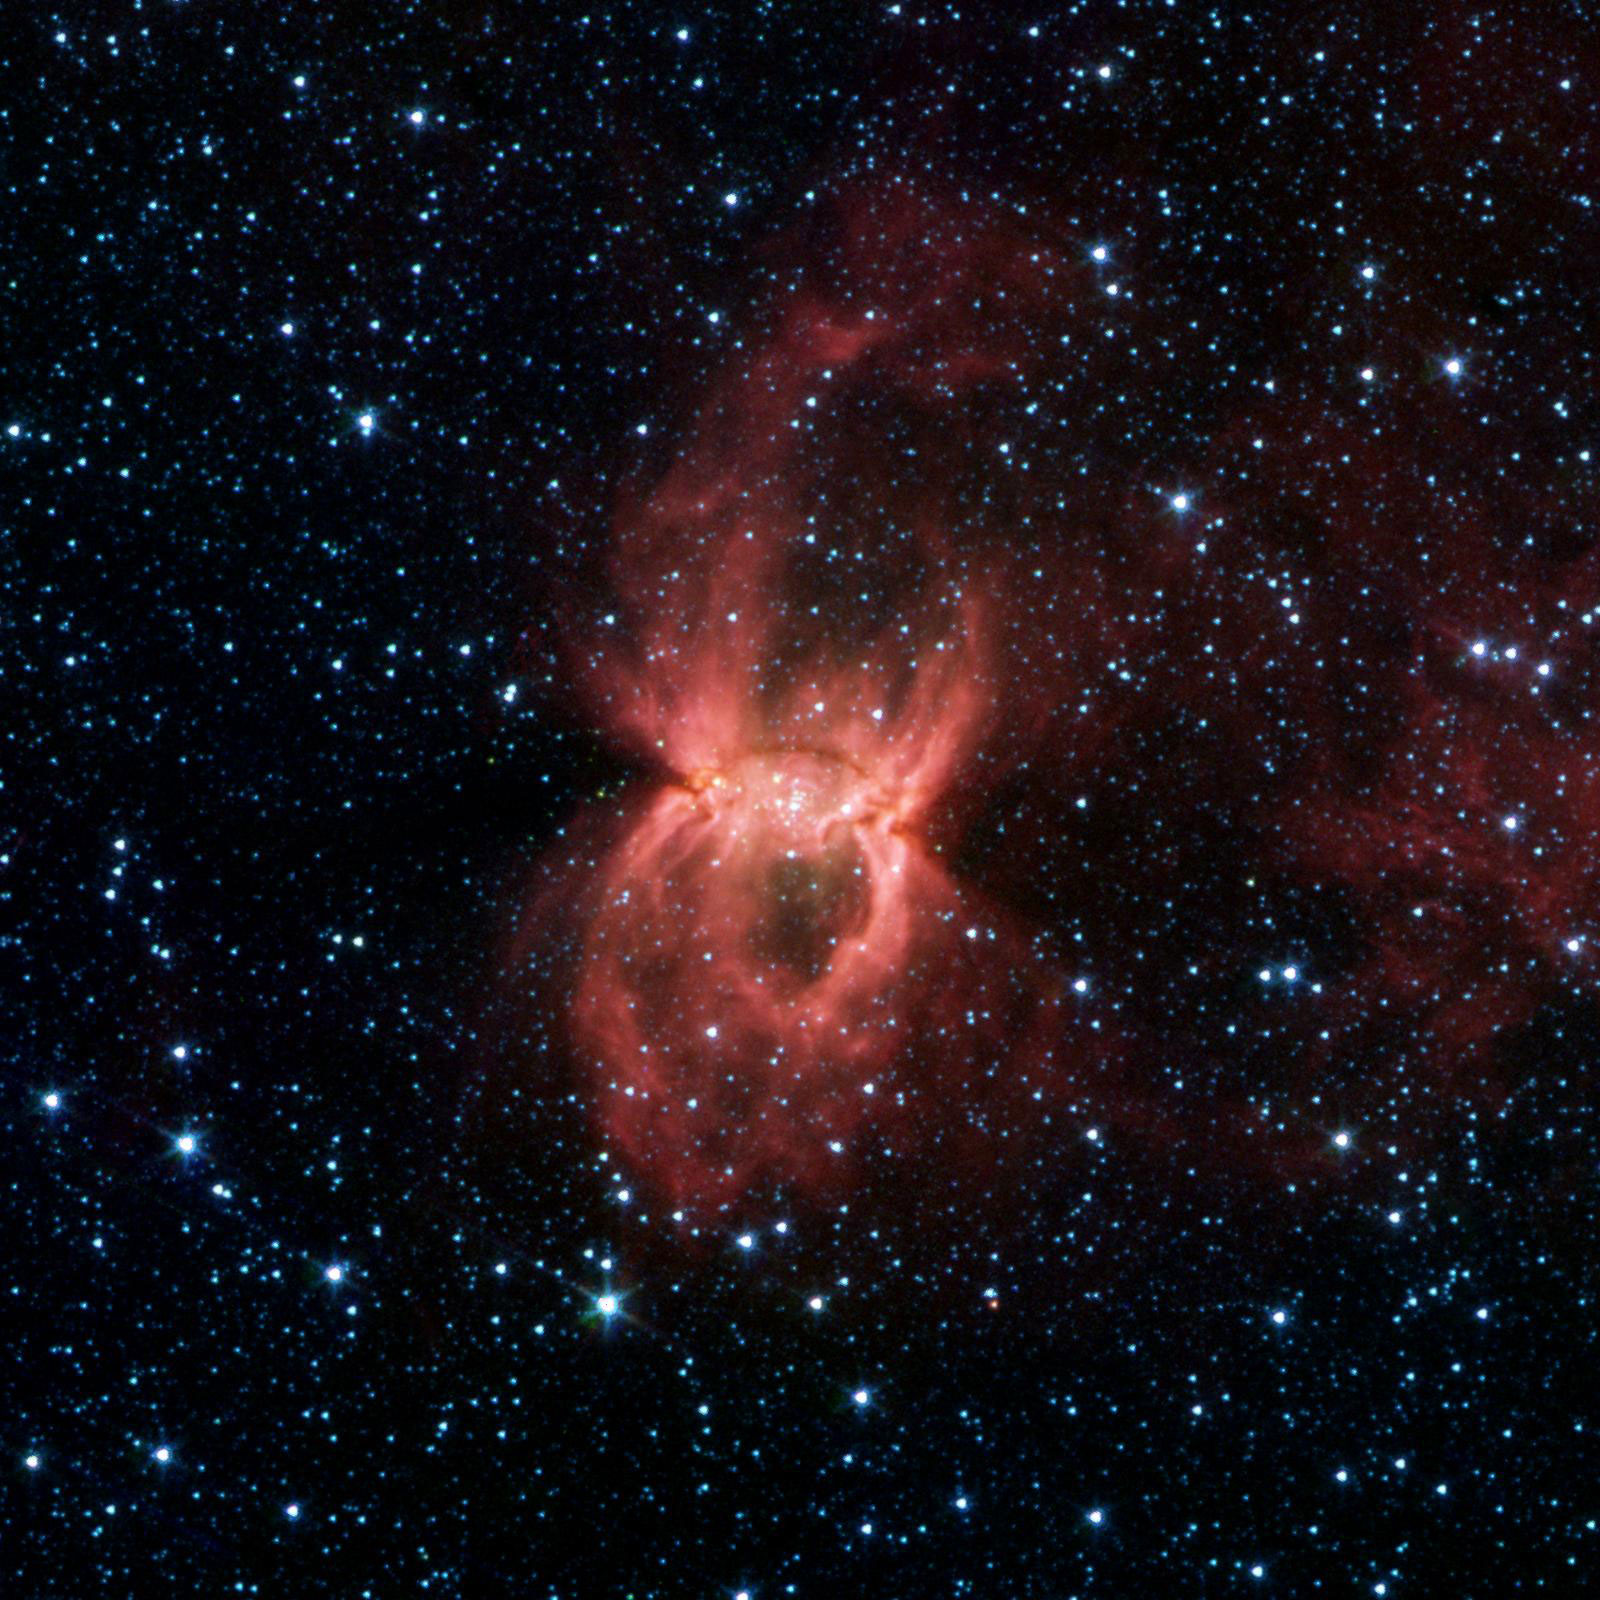 Black Widow Nebula Hides in the DustIn this Spitzer image, the two opposing bubbles are being formed in opposite directions by the powerful outflows from massive groups of forming stars. The baby stars can be seen as specks of yellow where the two bubbles overlap. When individual stars form from molecular clouds of gas and dust they produce intense radiation and very strong particle winds. Both the radiation and the stellar winds blow the dust outward from the star creating a cavity or bubble. In the case of the Black Widow Nebula, astronomers suspect that a large cloud of gas and dust condensed to create multiple clusters of massive star formation. The combined winds from these groups of large stars probably blew out bubbles into the direction of least resistance, forming a double bubble. Image credit: NASA/JPL-Caltech/Univ. of Wisc.